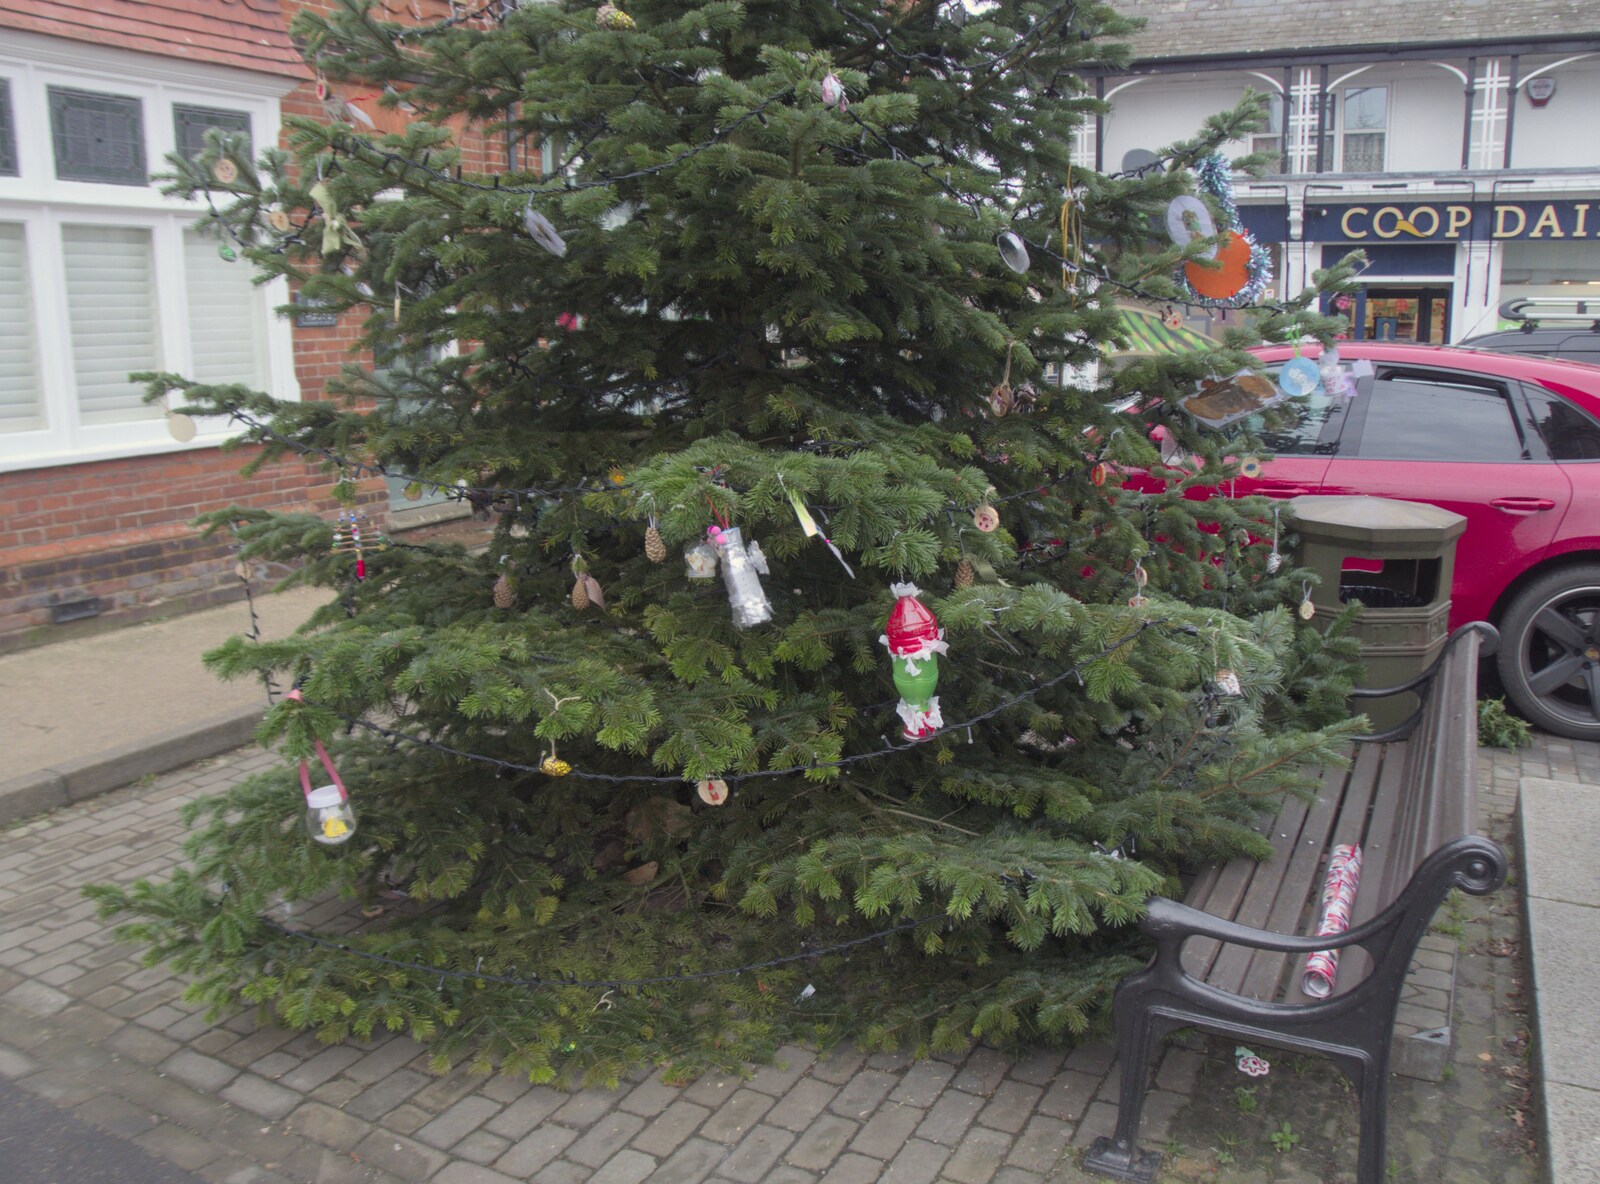 Primary school kids have hung randomness on the tree from The Lost Architecture of Ipswich, Suffolk - 11th December 2023